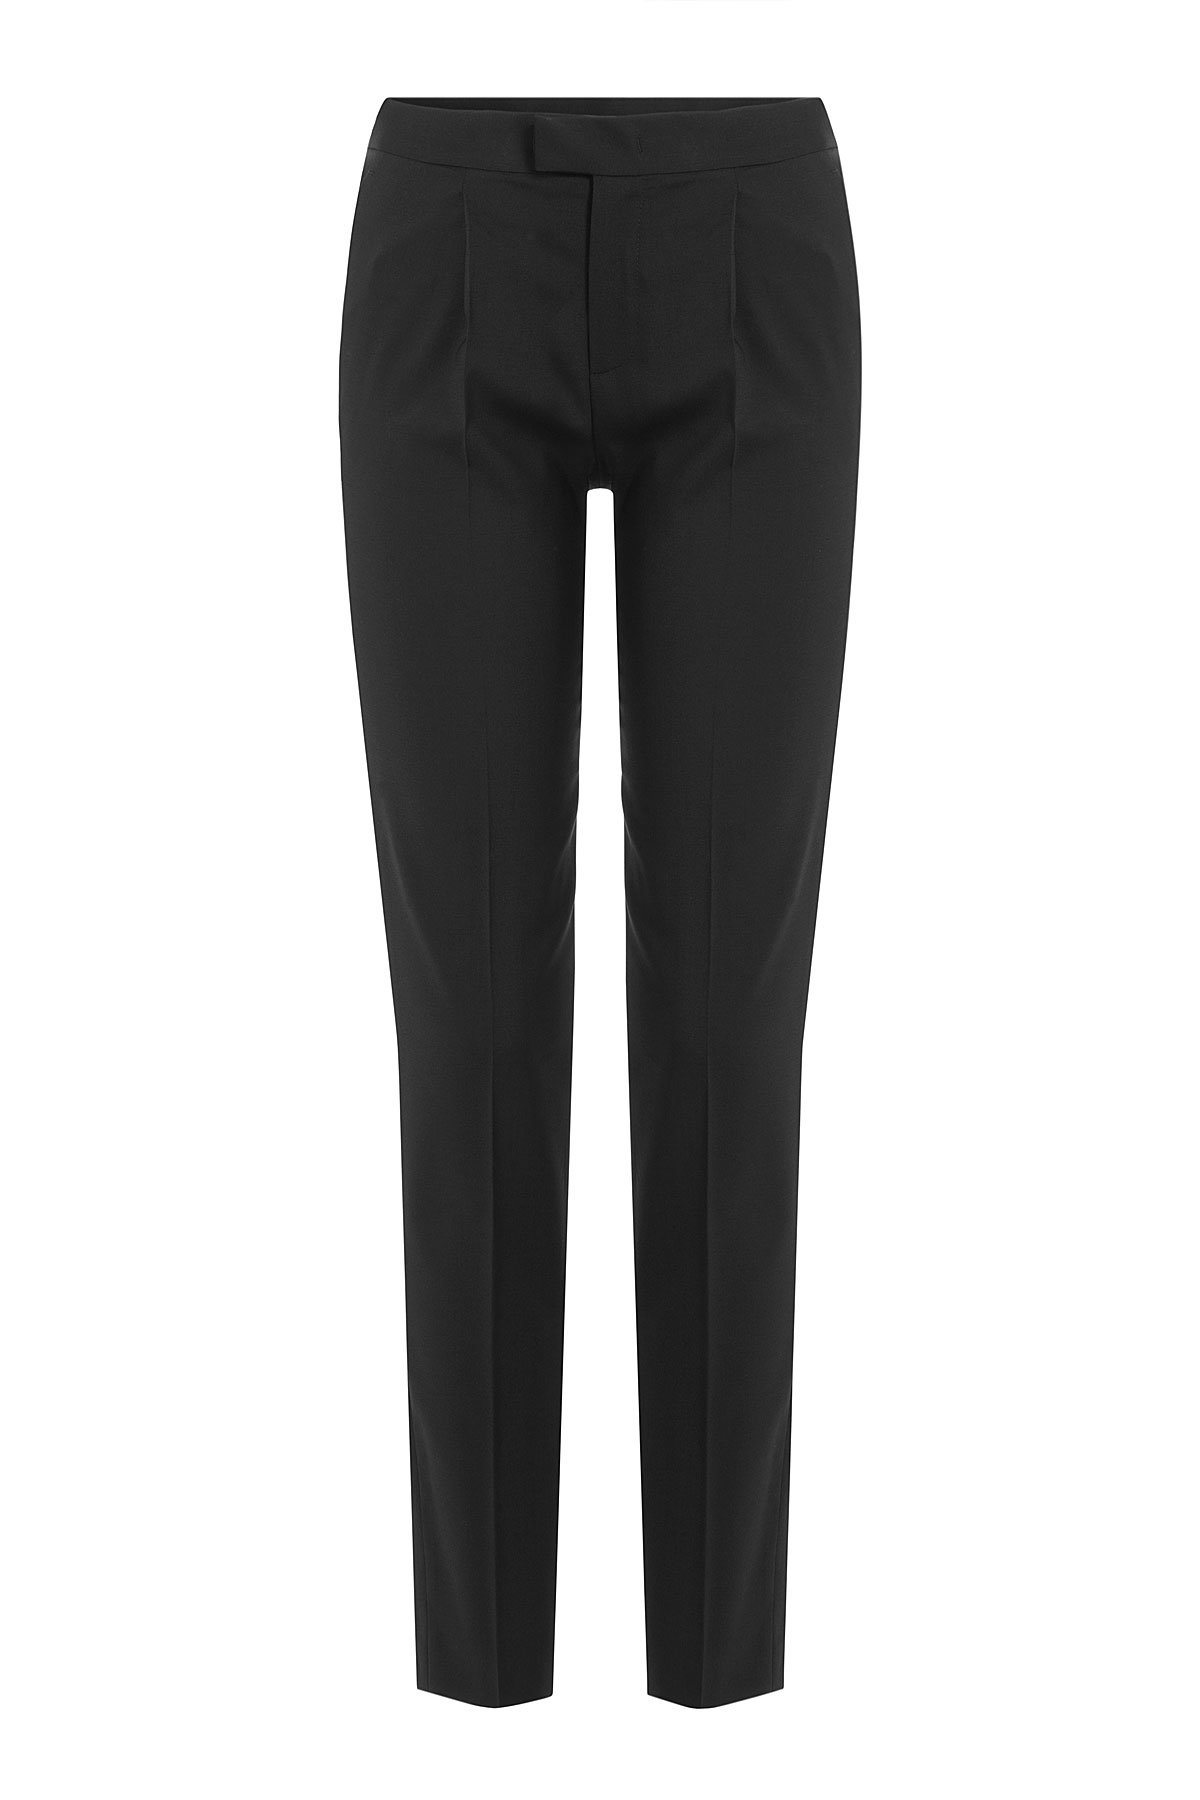 Red Valentino - Pleated Front Wool Trousers